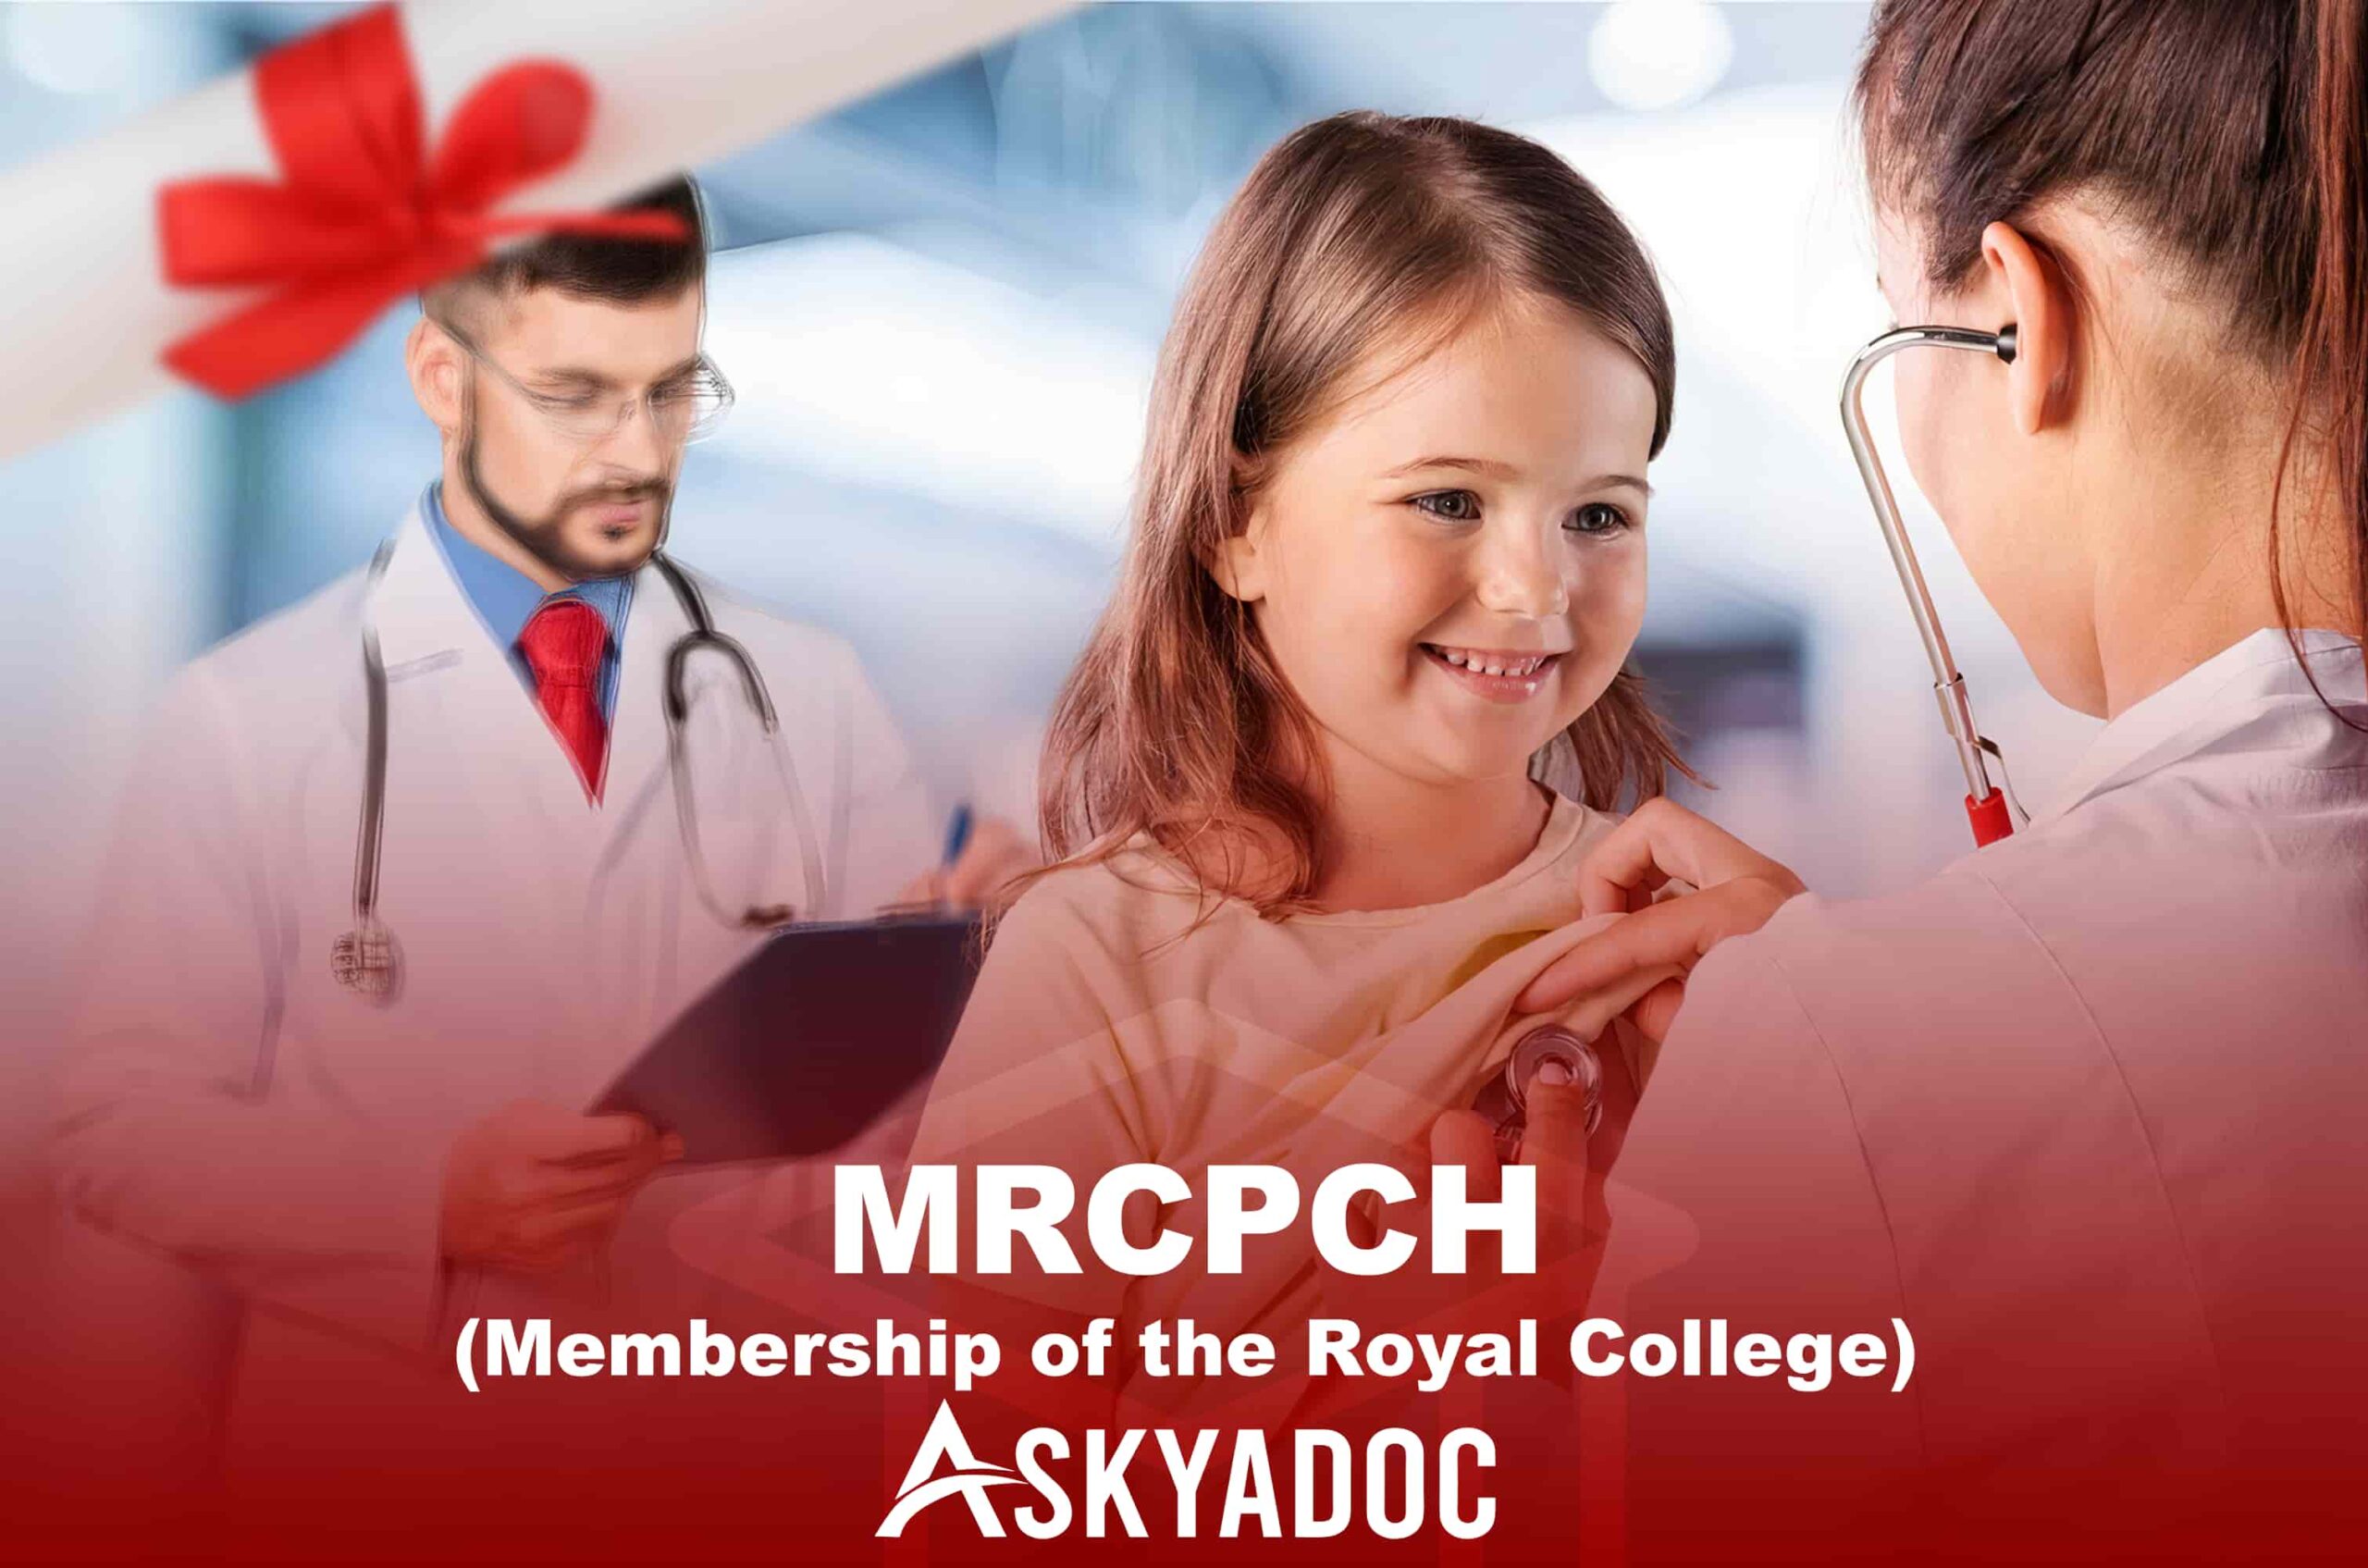 MRCPCH (Membership of the Royal College)